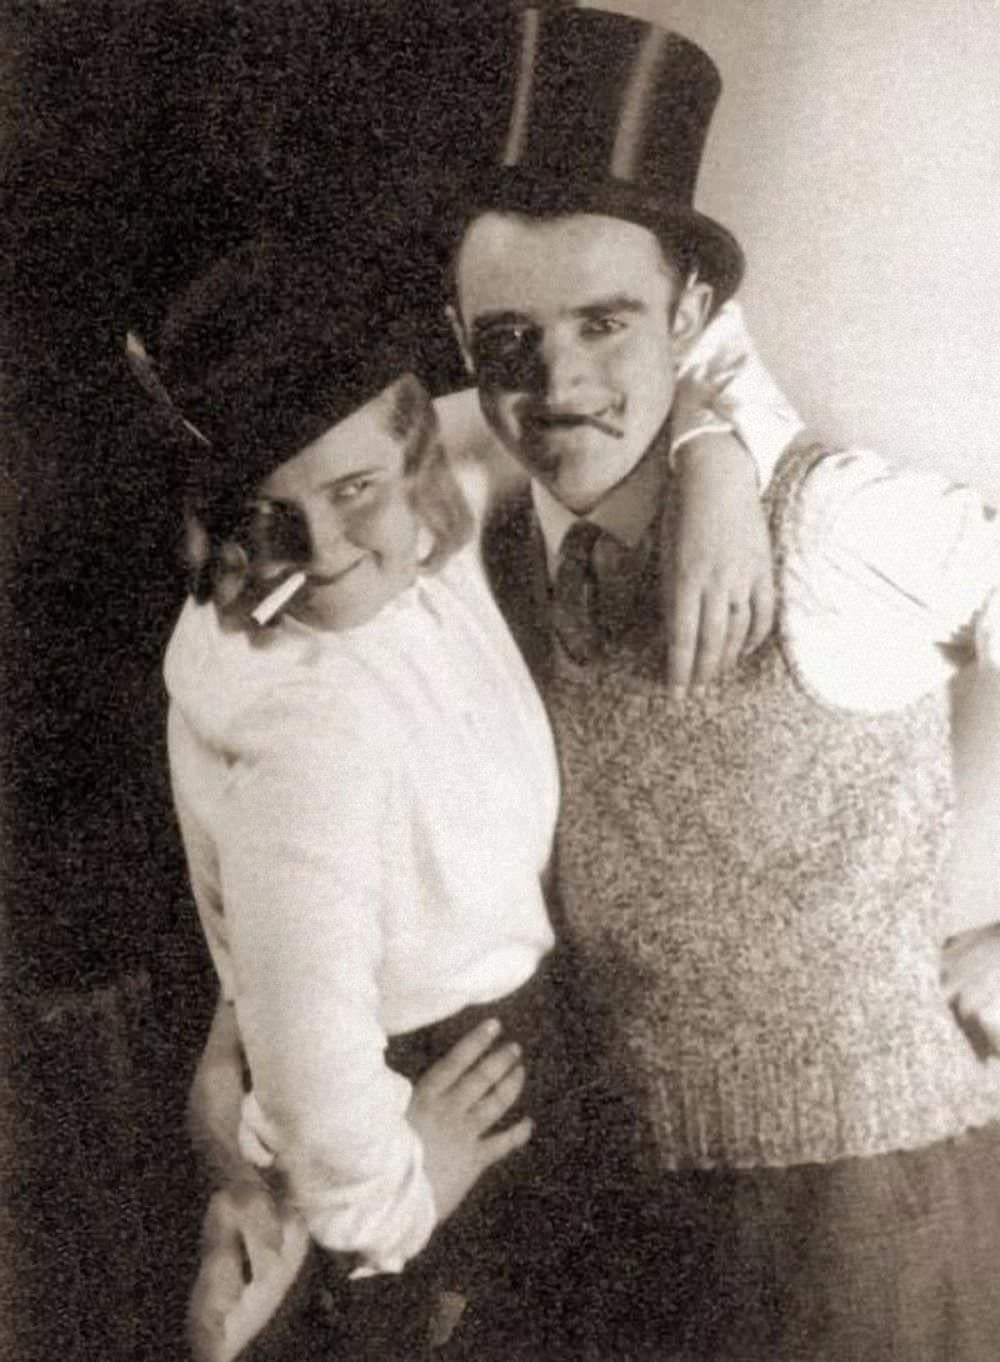 Eva Braun and an unidentified friend at a house party in Munich, 1935. By all accounts Braun enjoyed these parties and frequently dressed up for them during carnival. She also liked to smoke but only when Hitler was not around.